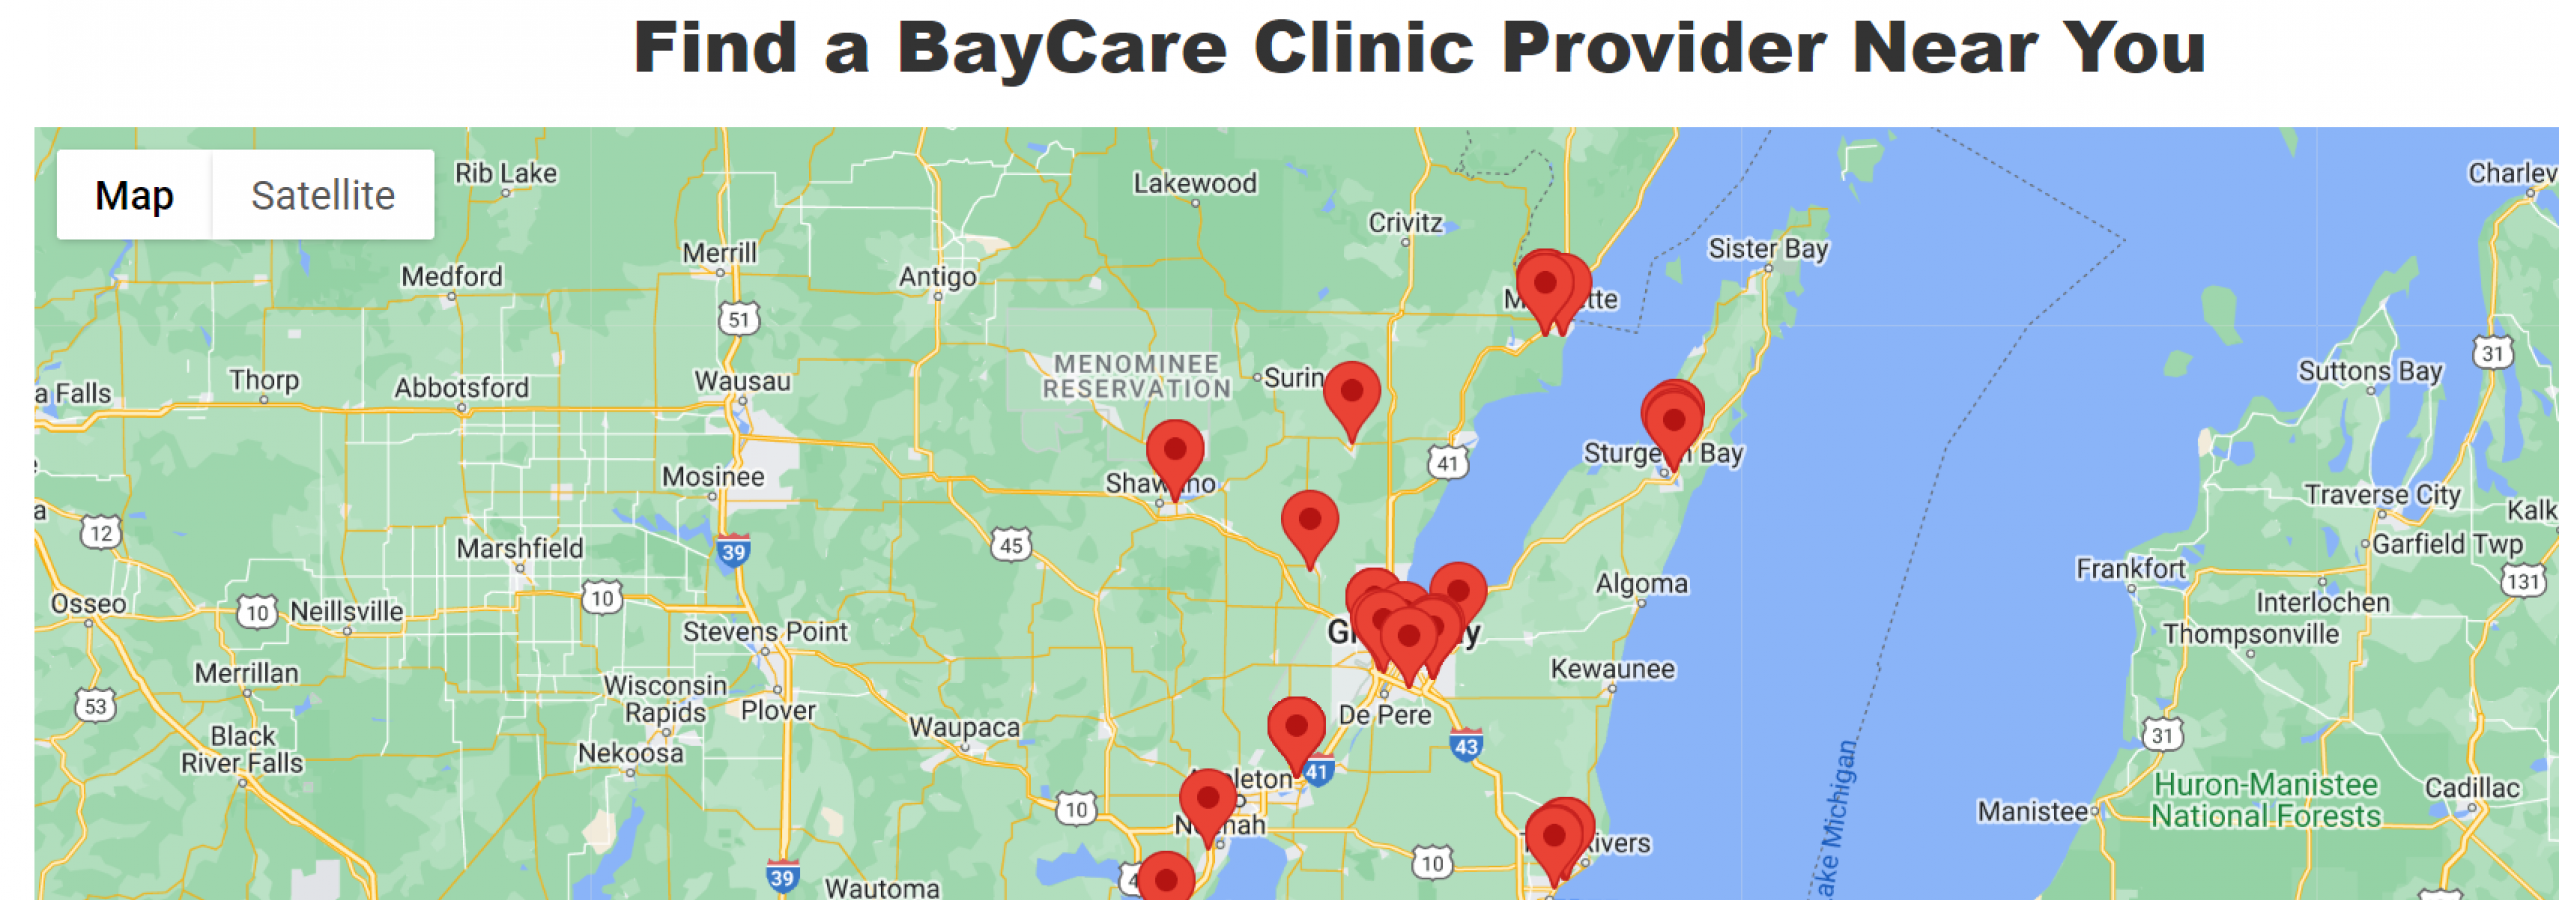 photo of baycare clinic locations